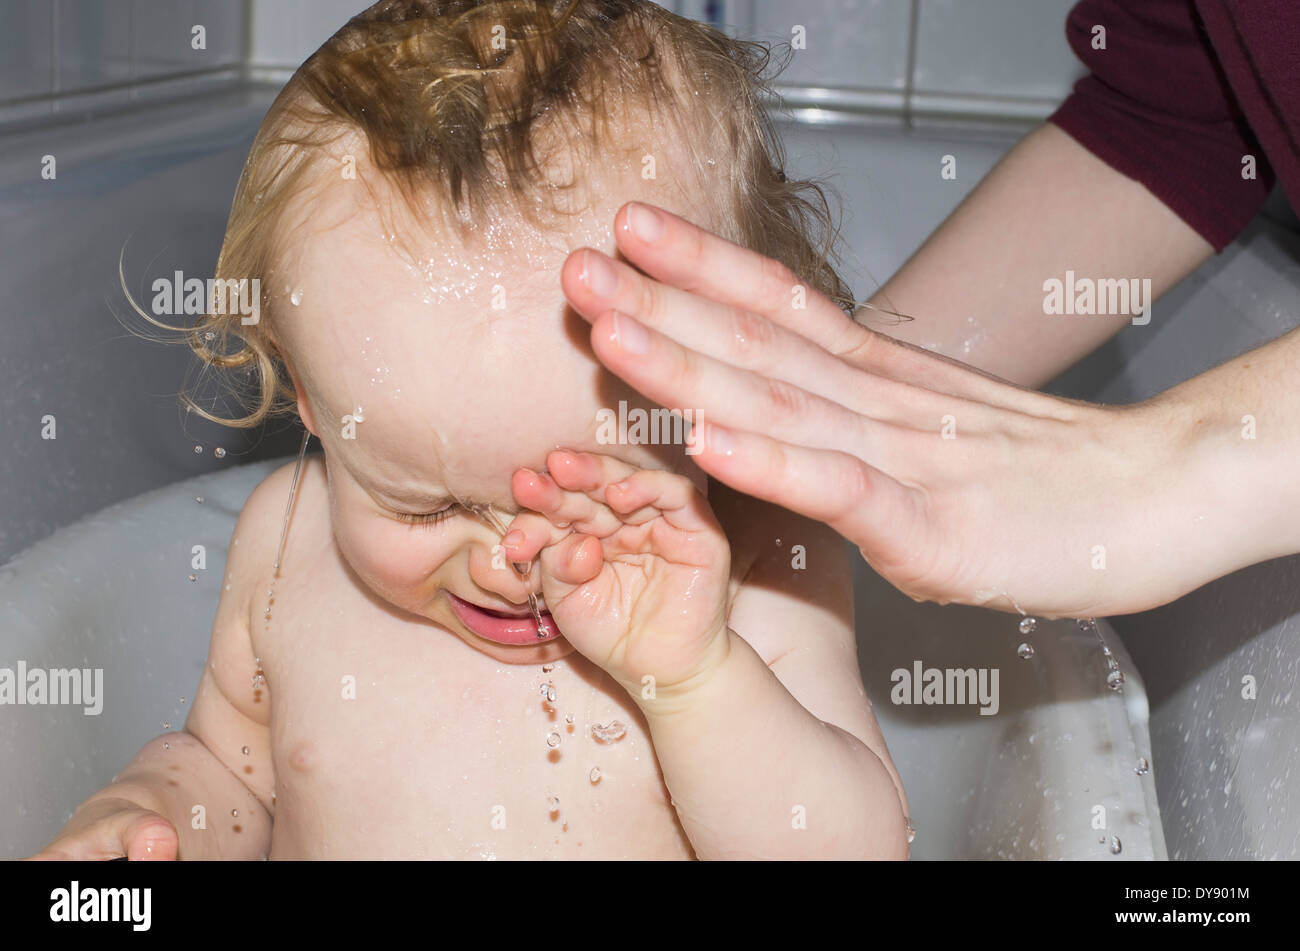 Toddler in bath tub getting washed by mother Stock Photo